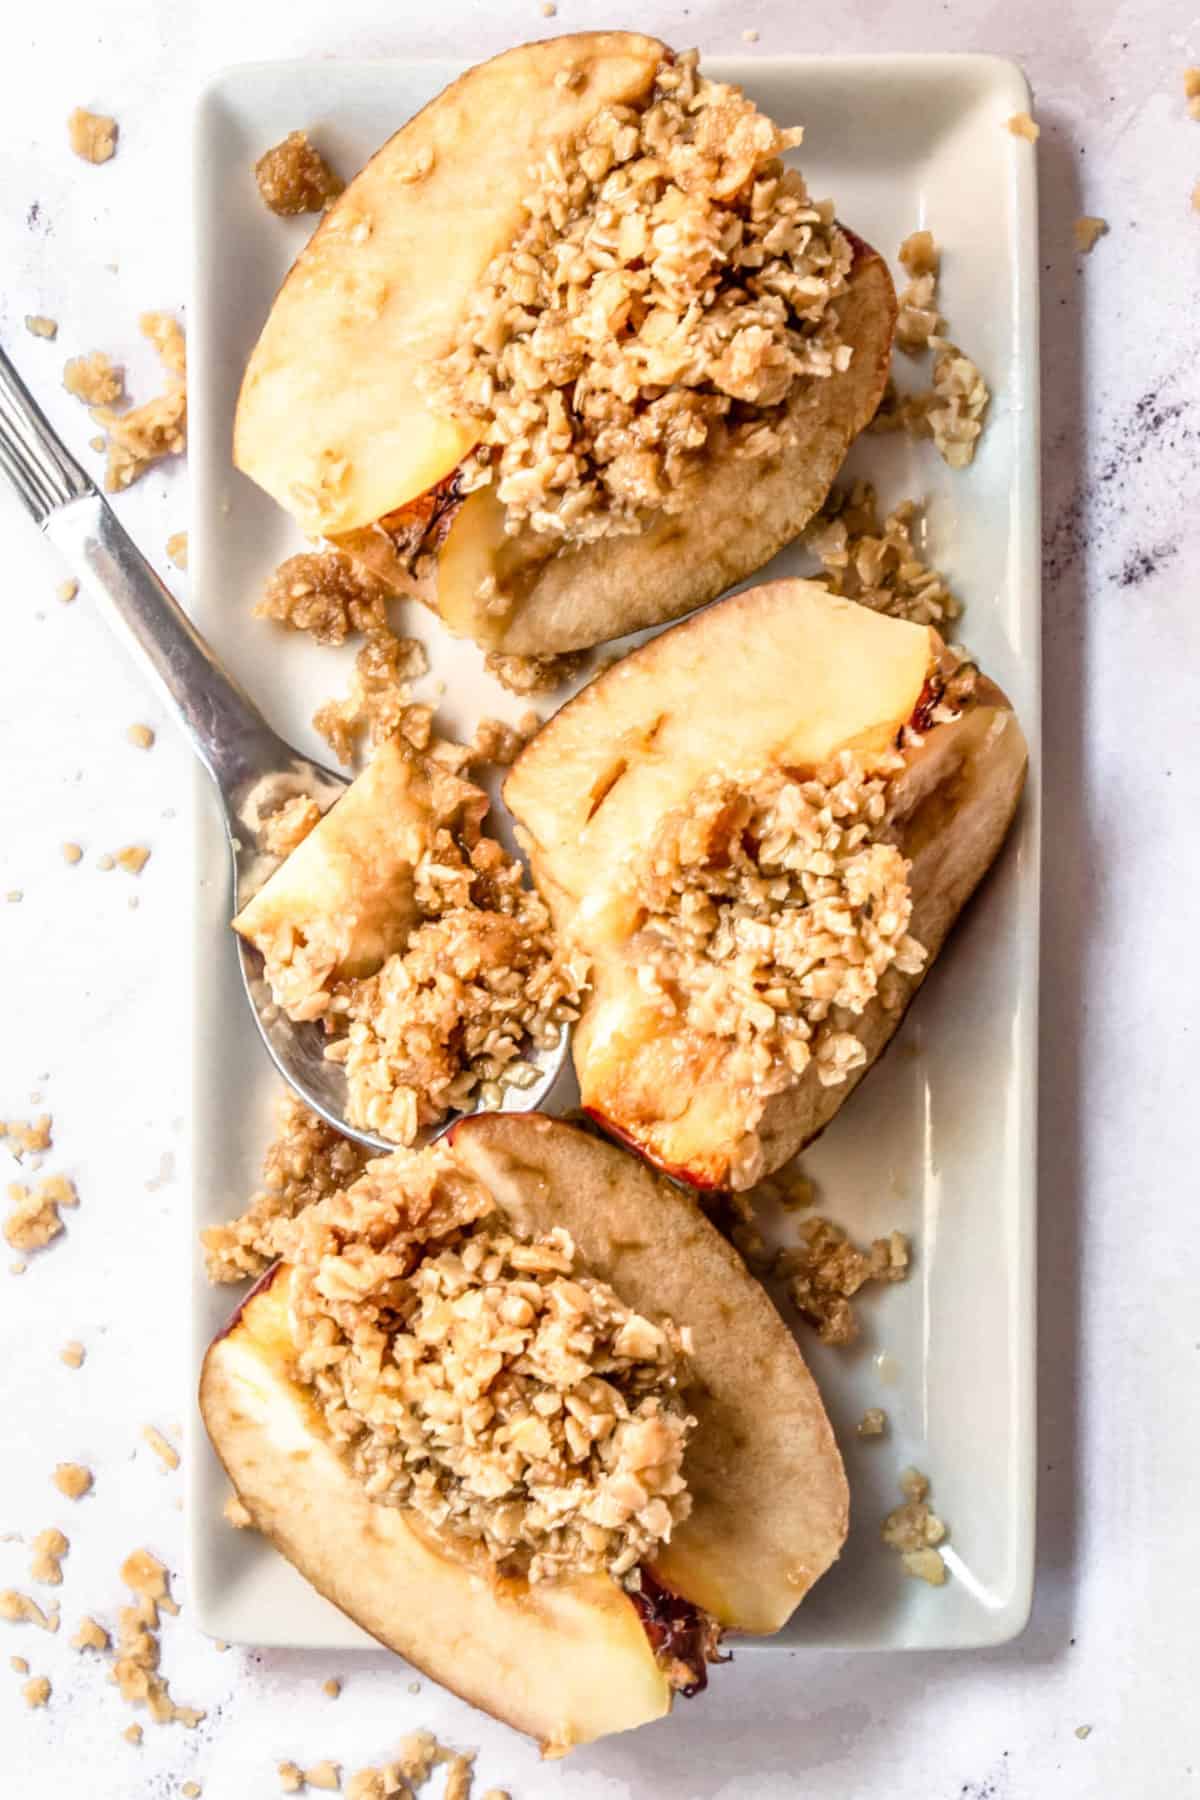 Three slices of the best oatmeal baked apples on a serving dish with a spoon.